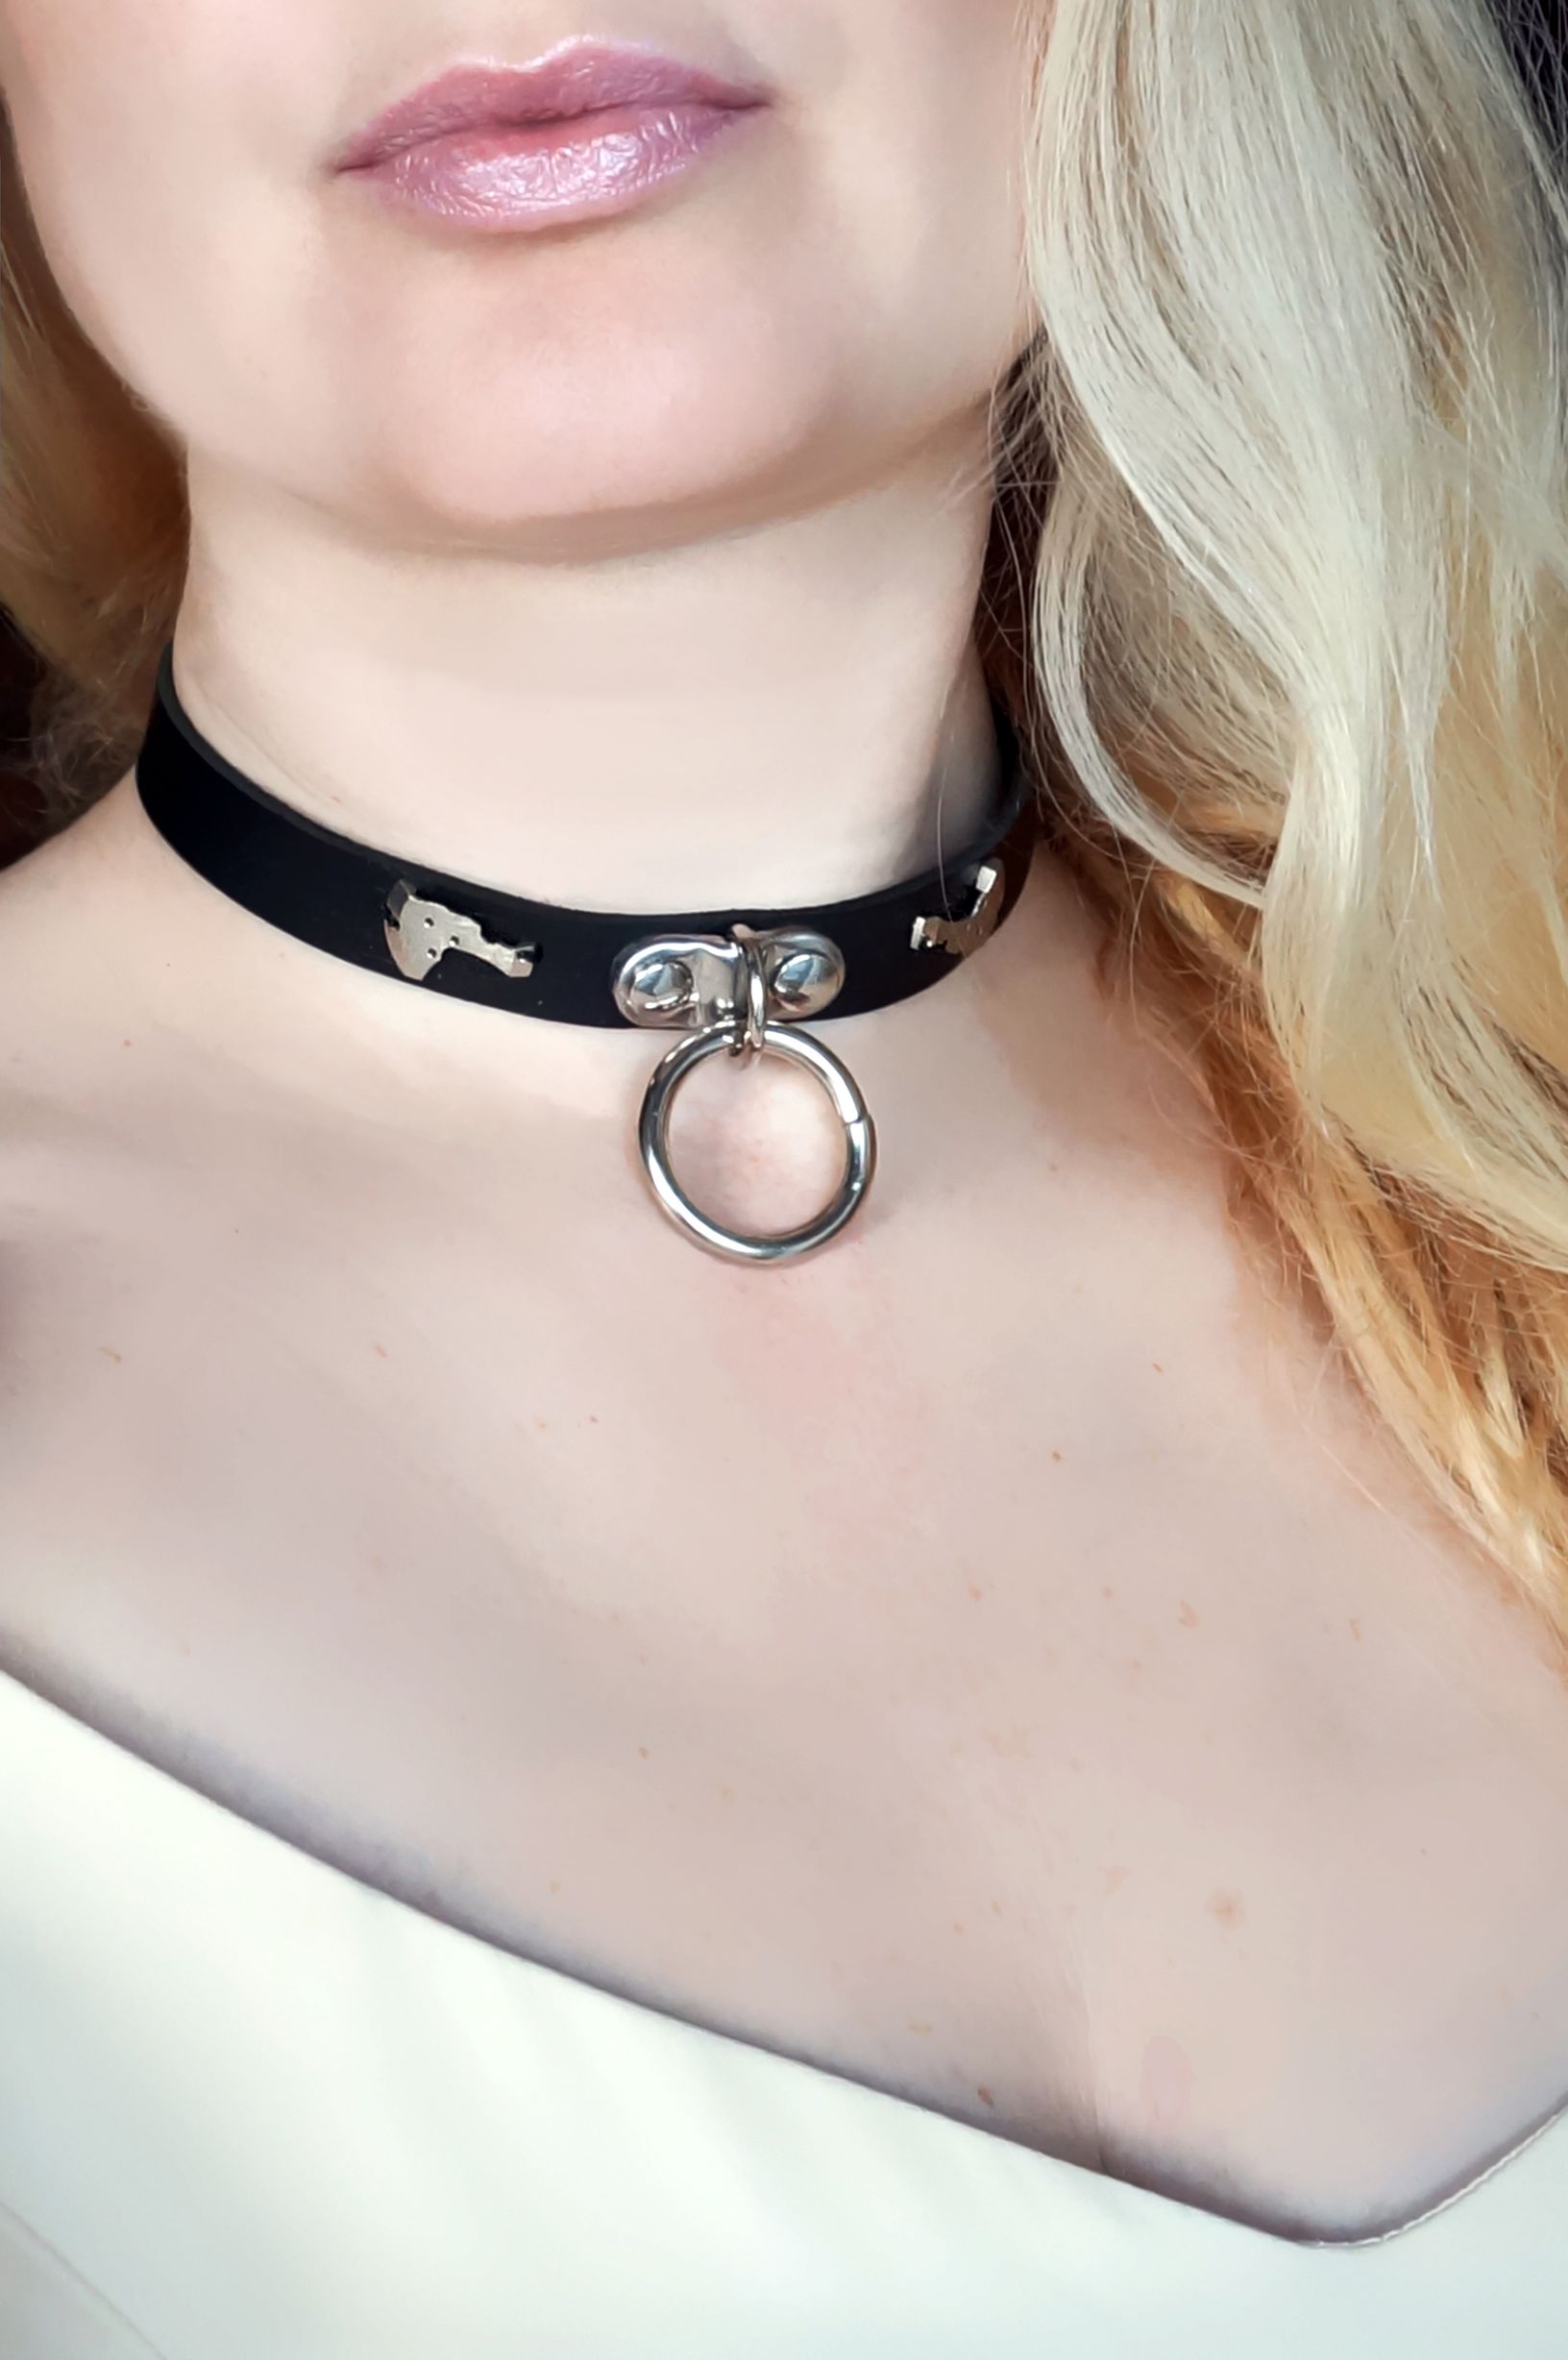 Steampunk bdsm submissive slave leather collar.